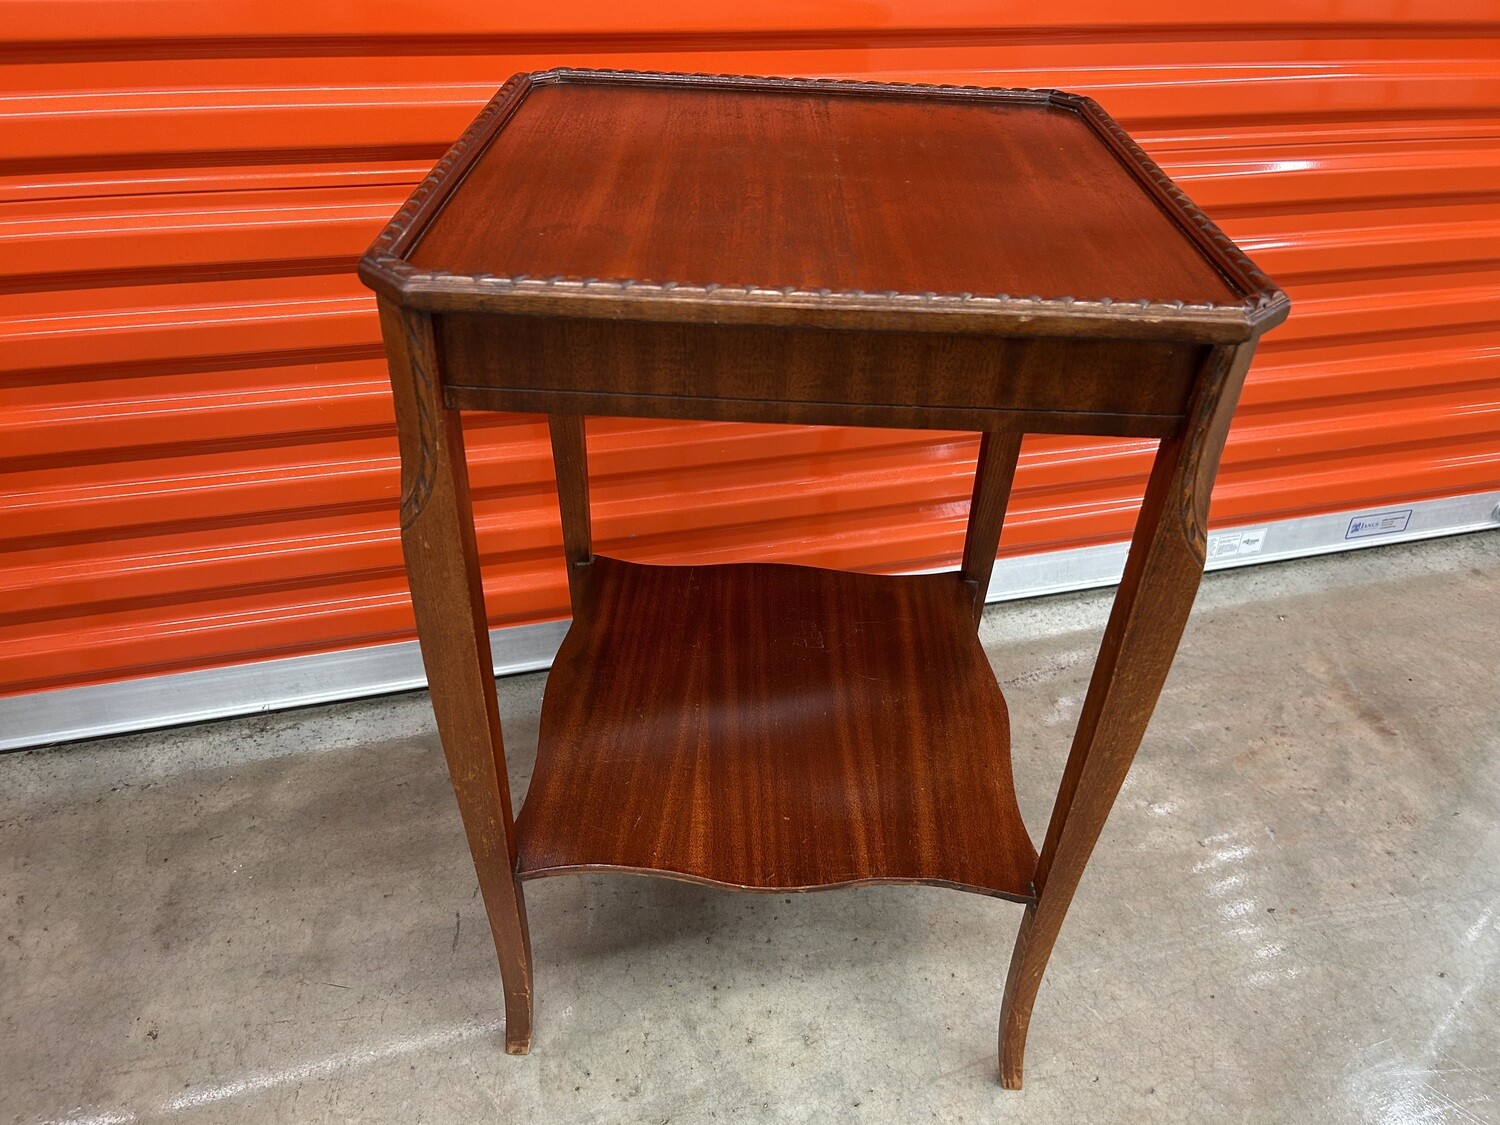 Antique Side Table with carved accents #2118 ** 5 mos. to sell, 20% off